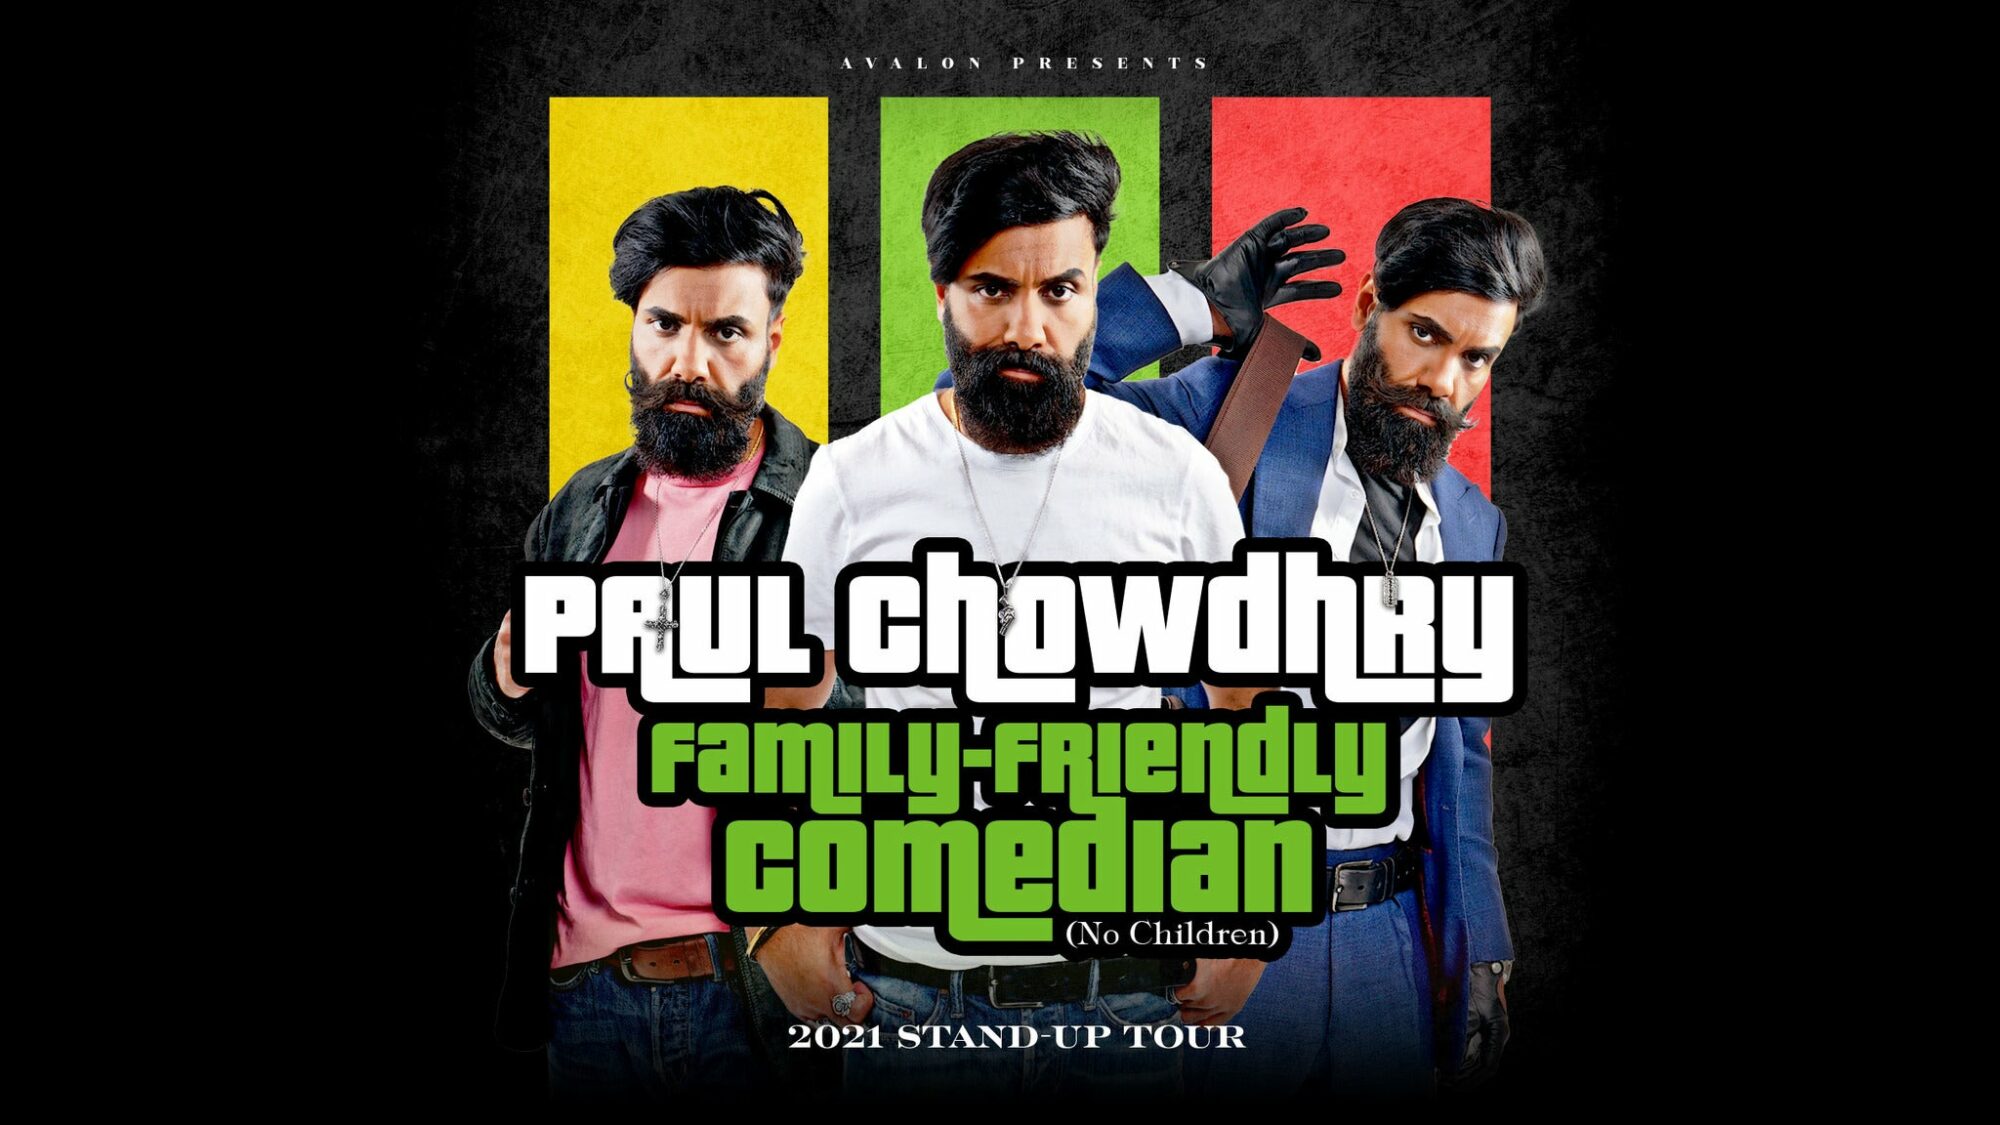 Image name Paul Chowdhry Family Friendly Comedian at St Georges Hall Bradford Bradford the 28 image from the post Paul Chowdhry: Family Friendly Comedian at St Georges Hall, Bradford, Bradford in Yorkshire.com.